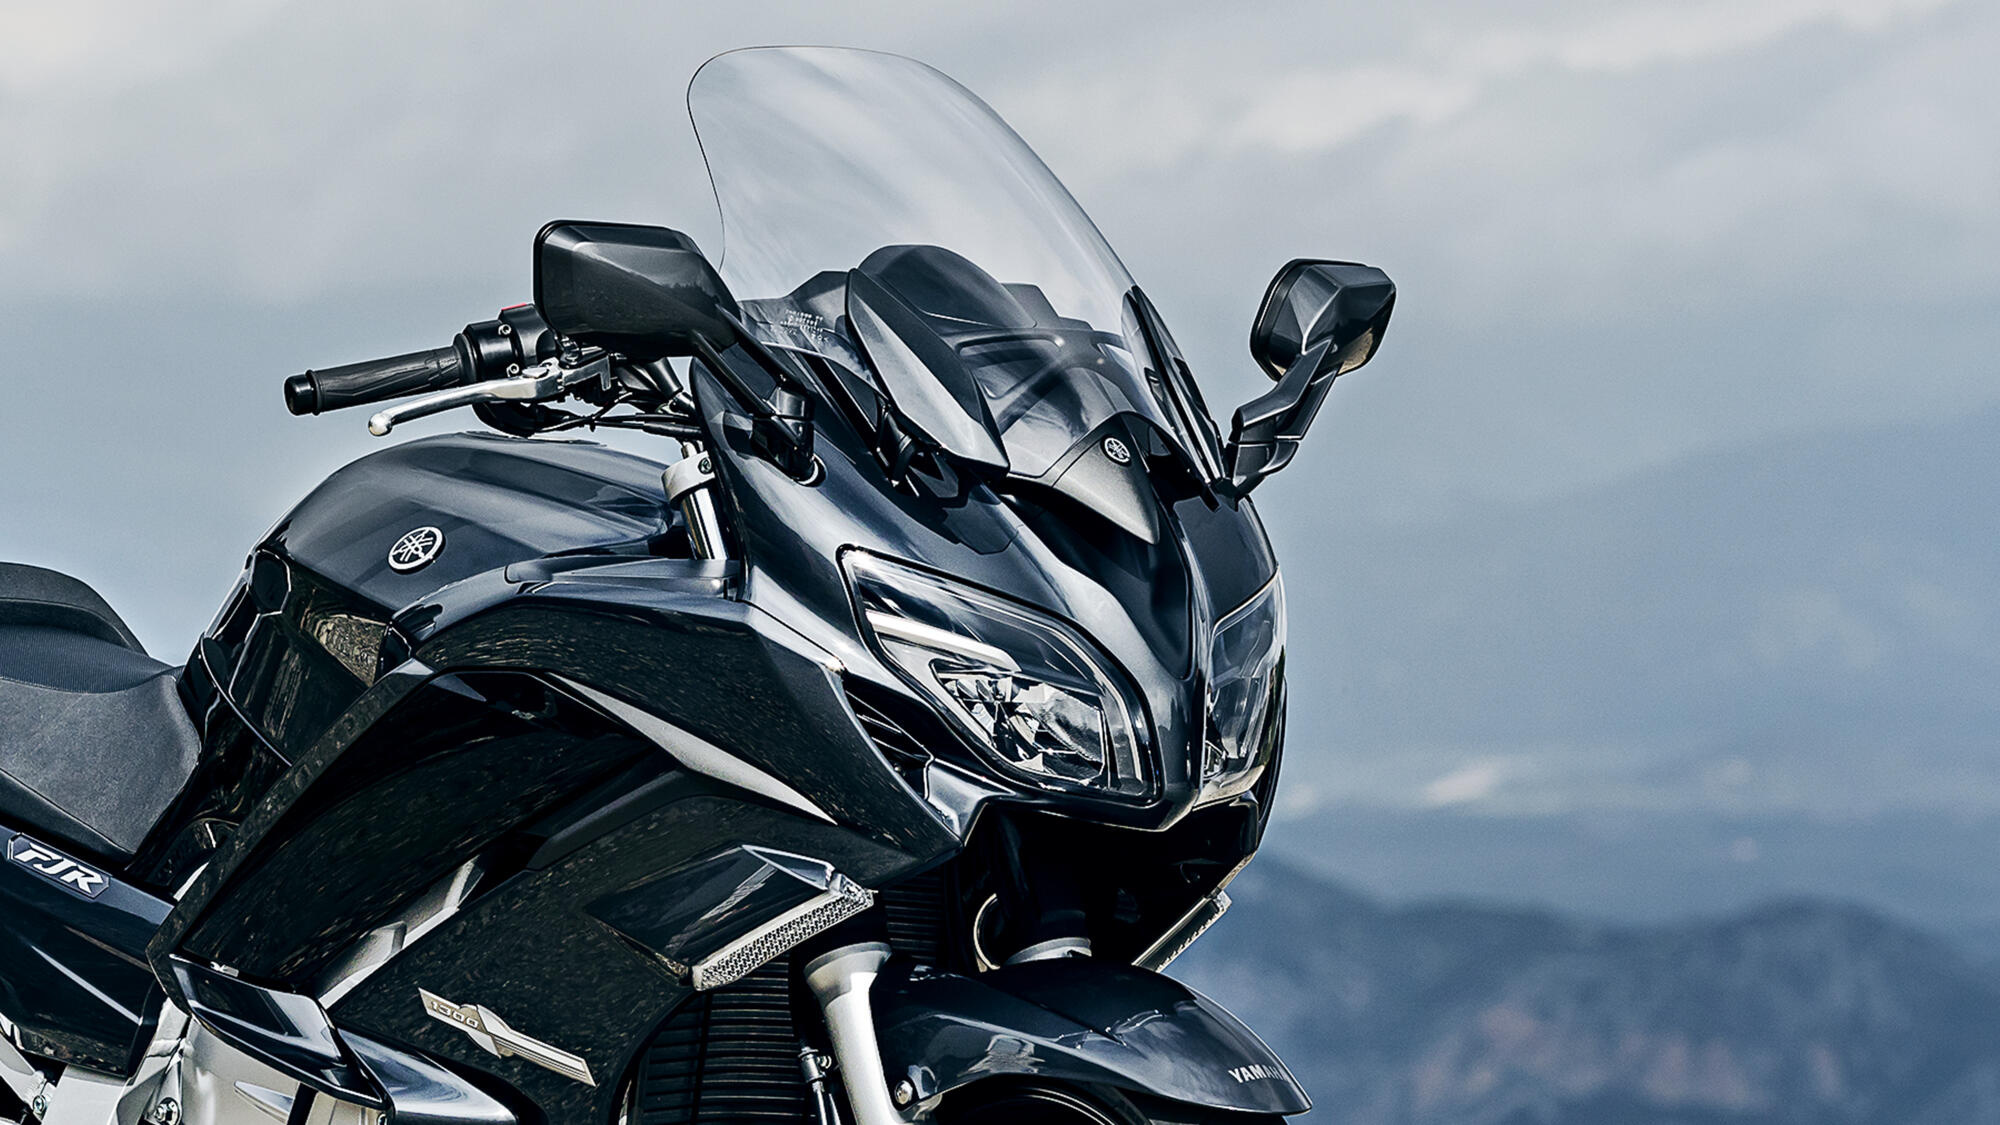 Yamaha FJR1300, Features and specifications, Motorcycle, 2000x1130 HD Desktop